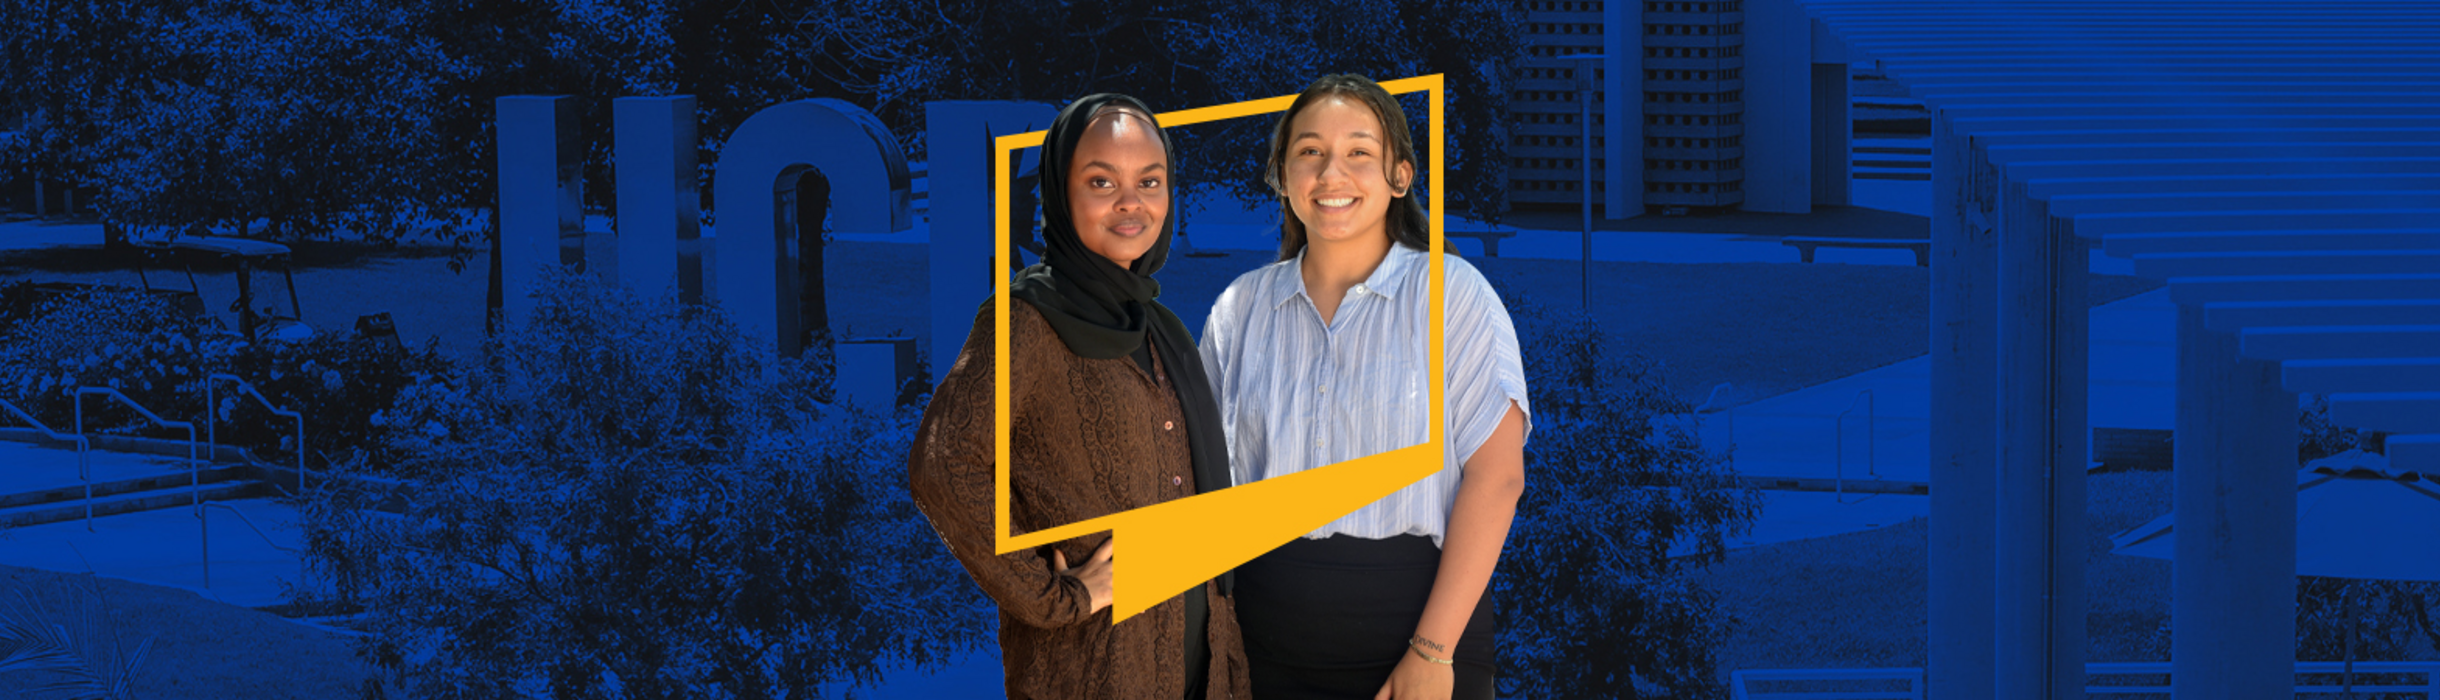 Two female students are framed by the gold UCR icon frame. The student on the left is wearing a black hijab and brown shirt. The student on the right wears a blue button-down shirt and black skirt. The blue-tinted background features the iconic UCR sculpture at the heart of the campus.